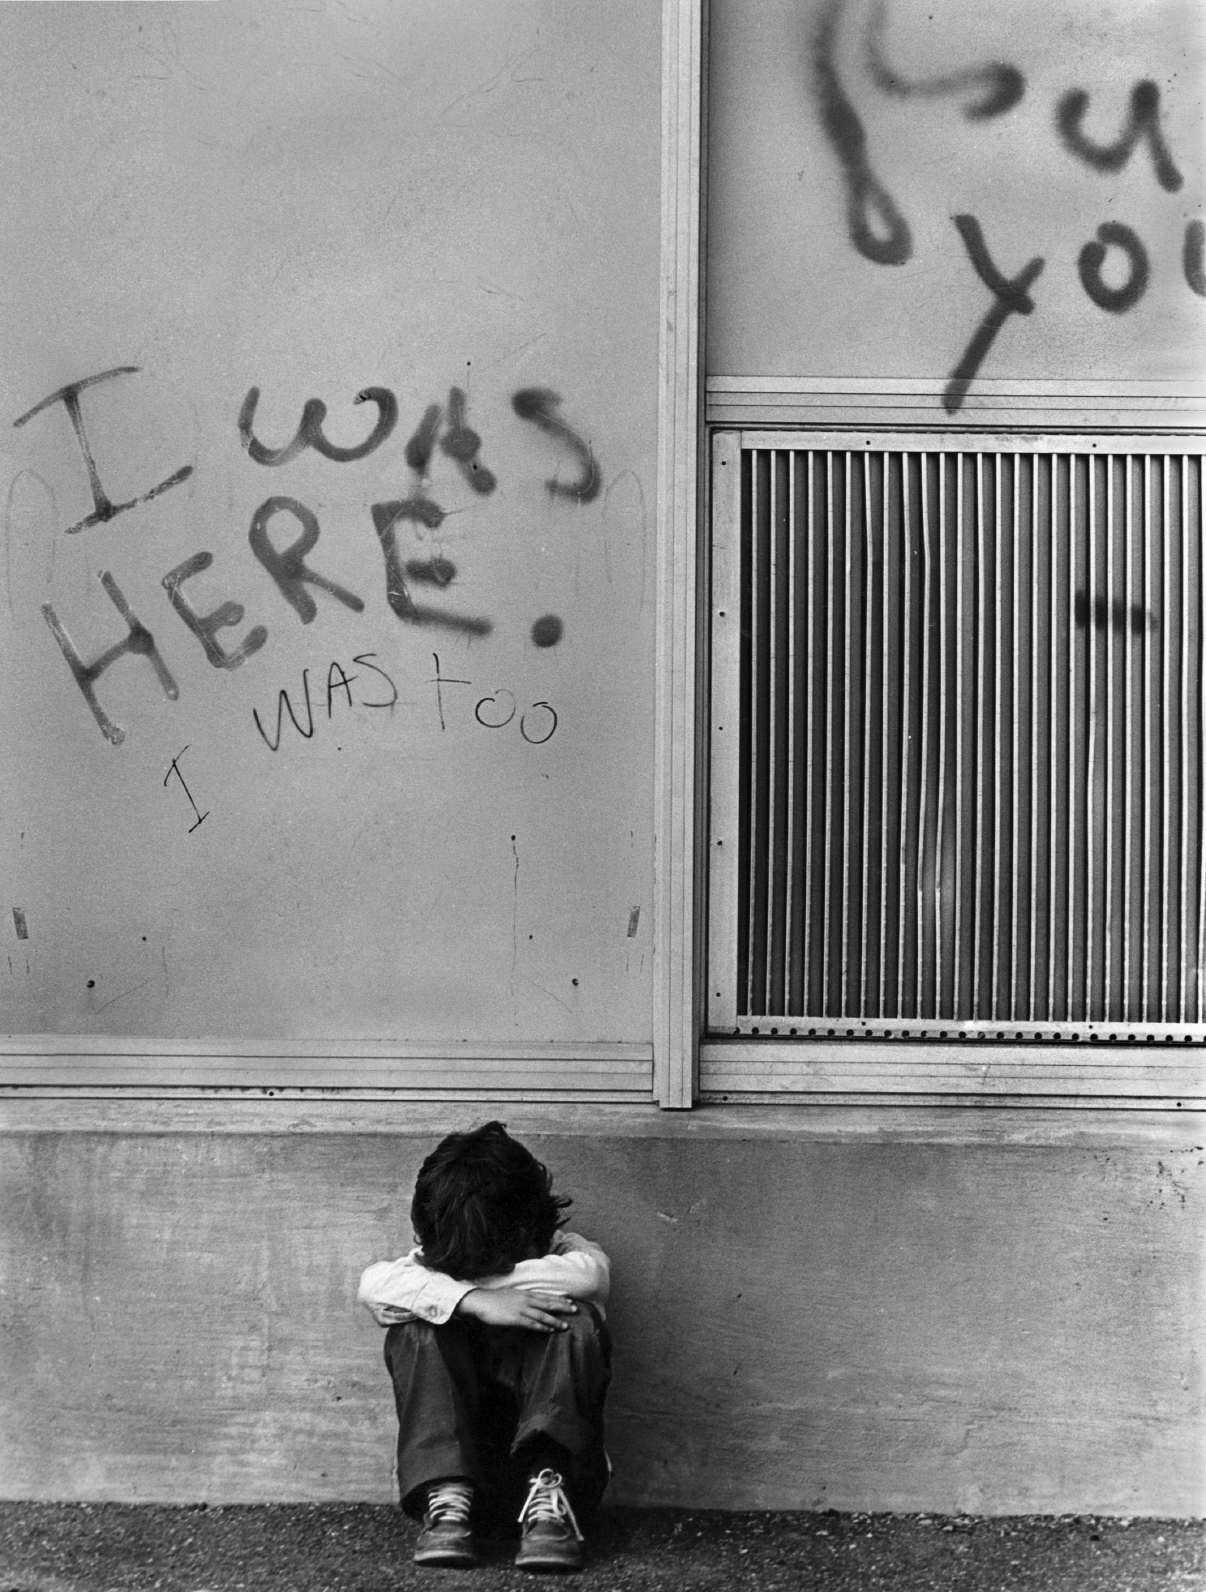 A small child is photographed sitting on the curb with his head in his hands.